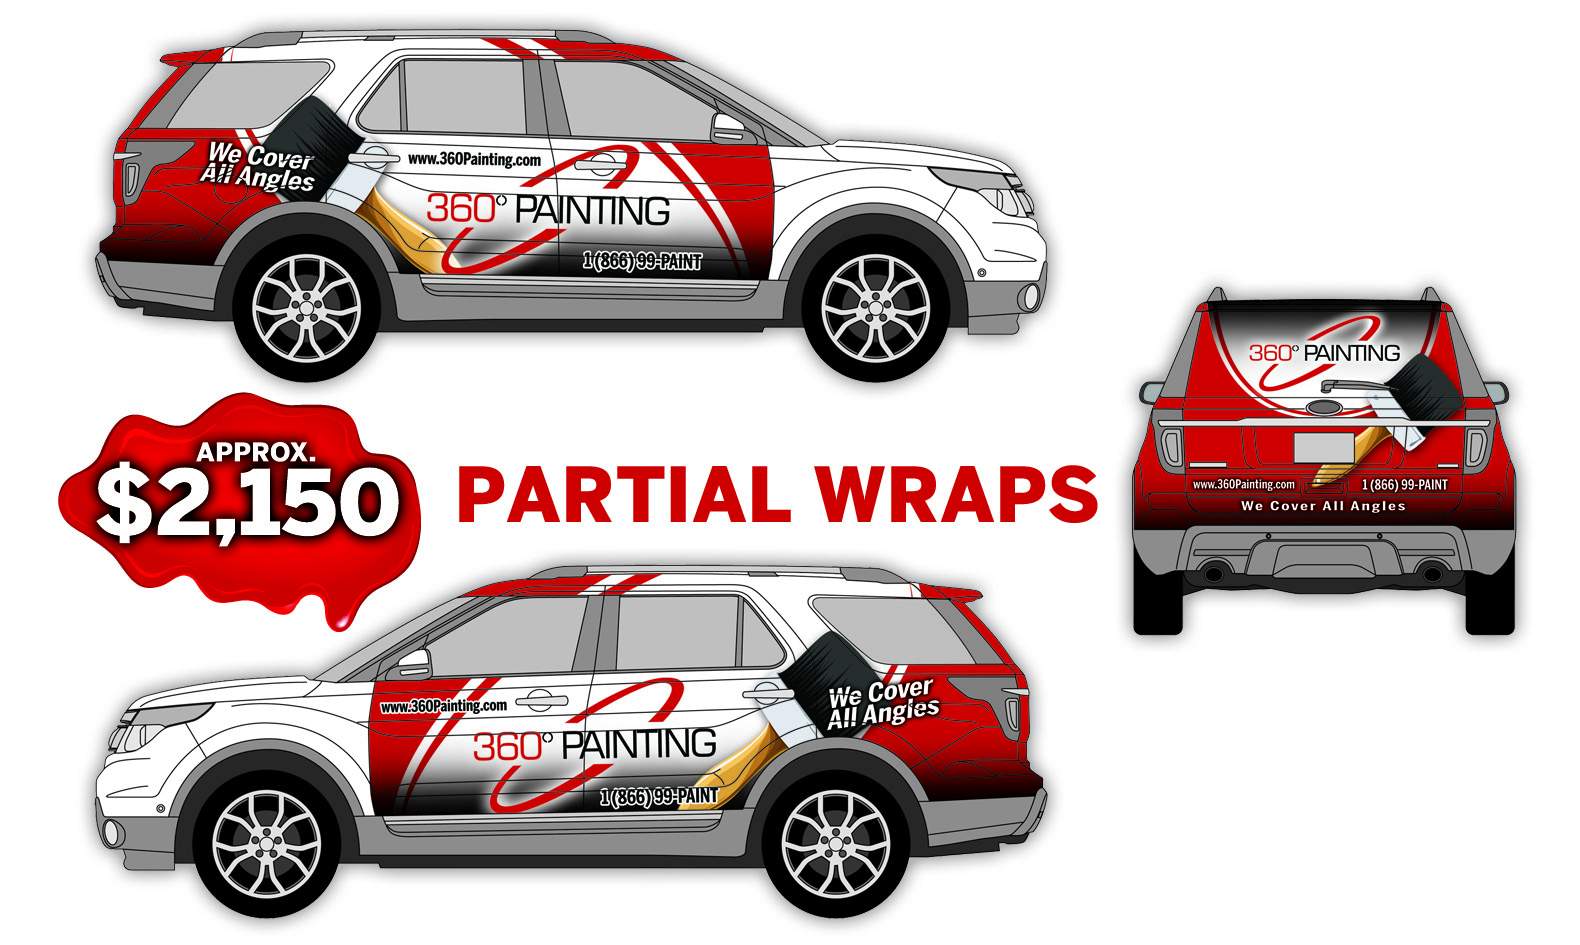 360 Painting Partial Wrap Layout Option